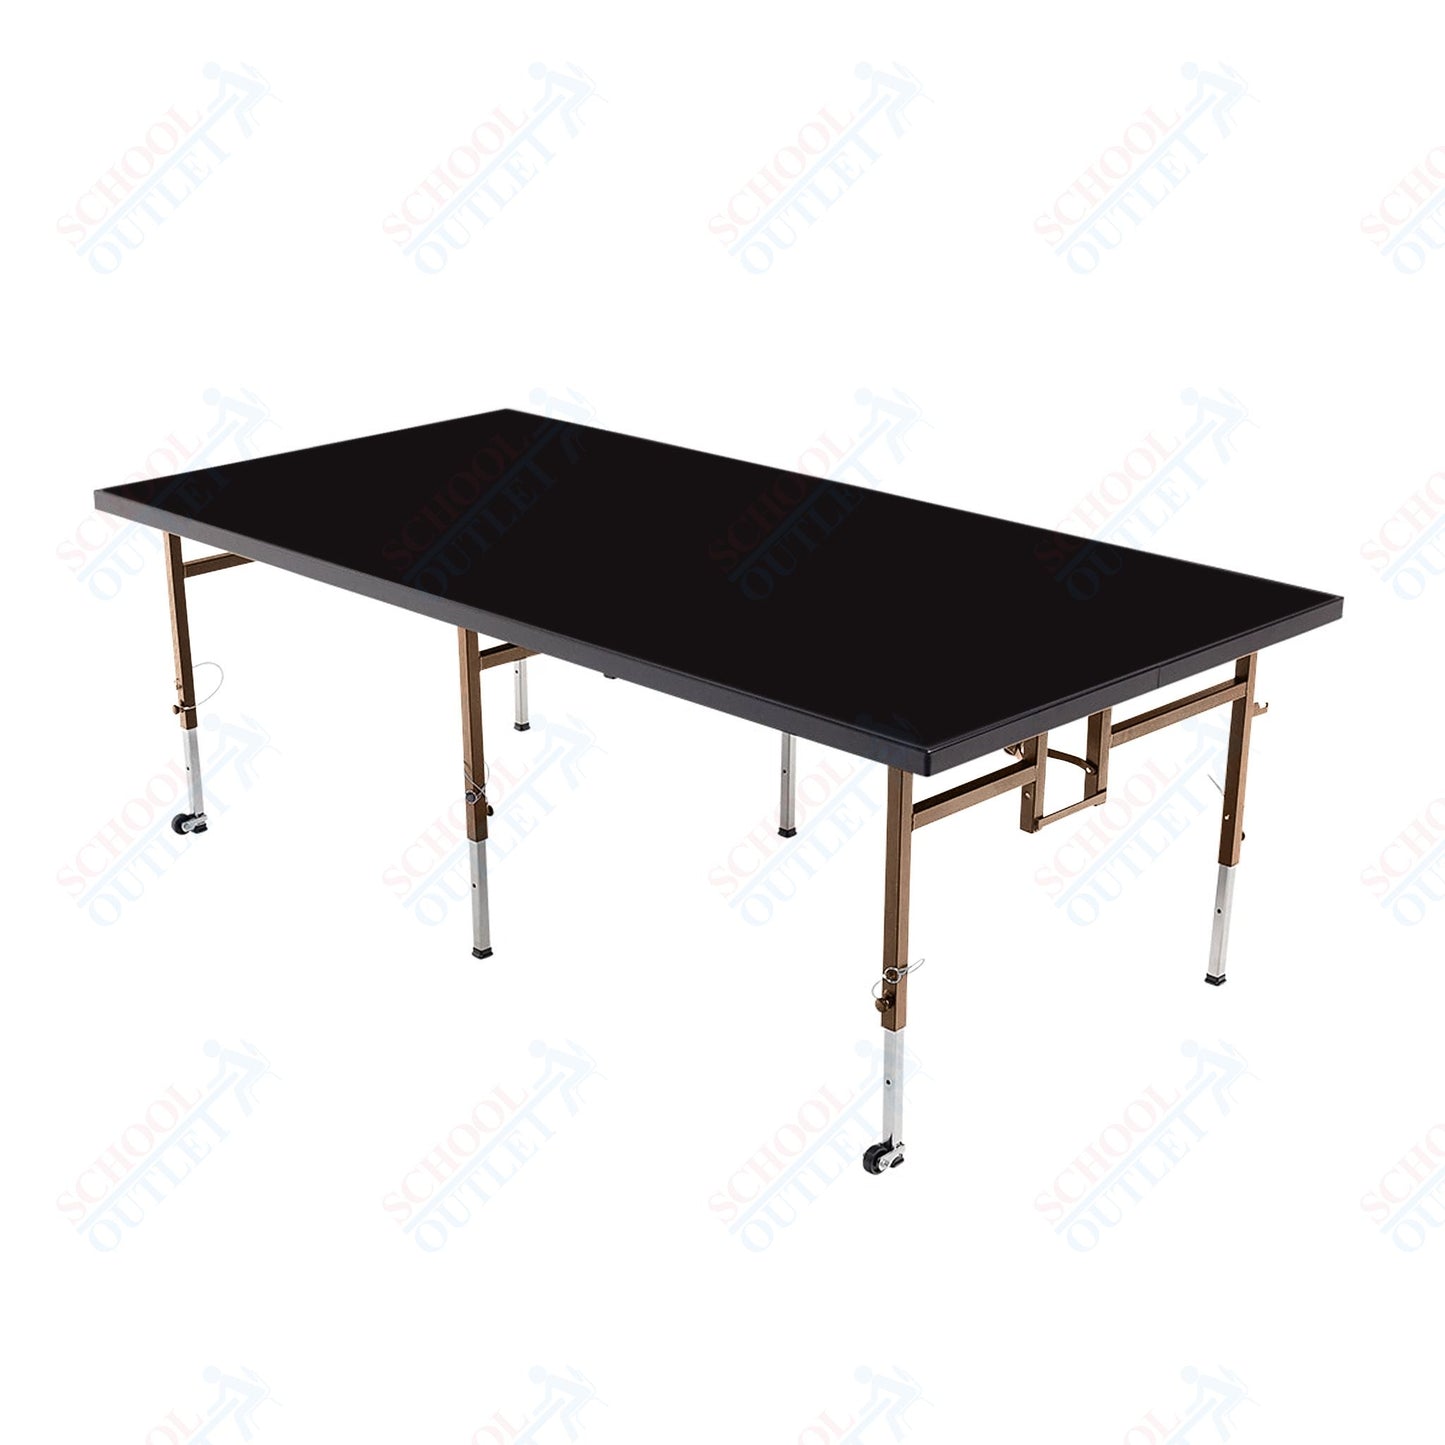 AmTab Adjustable Height Stage - Polypropylene Top - 36"W x 96"L x Adjustable 16" to 24"H  (AmTab AMT-STA3816P)